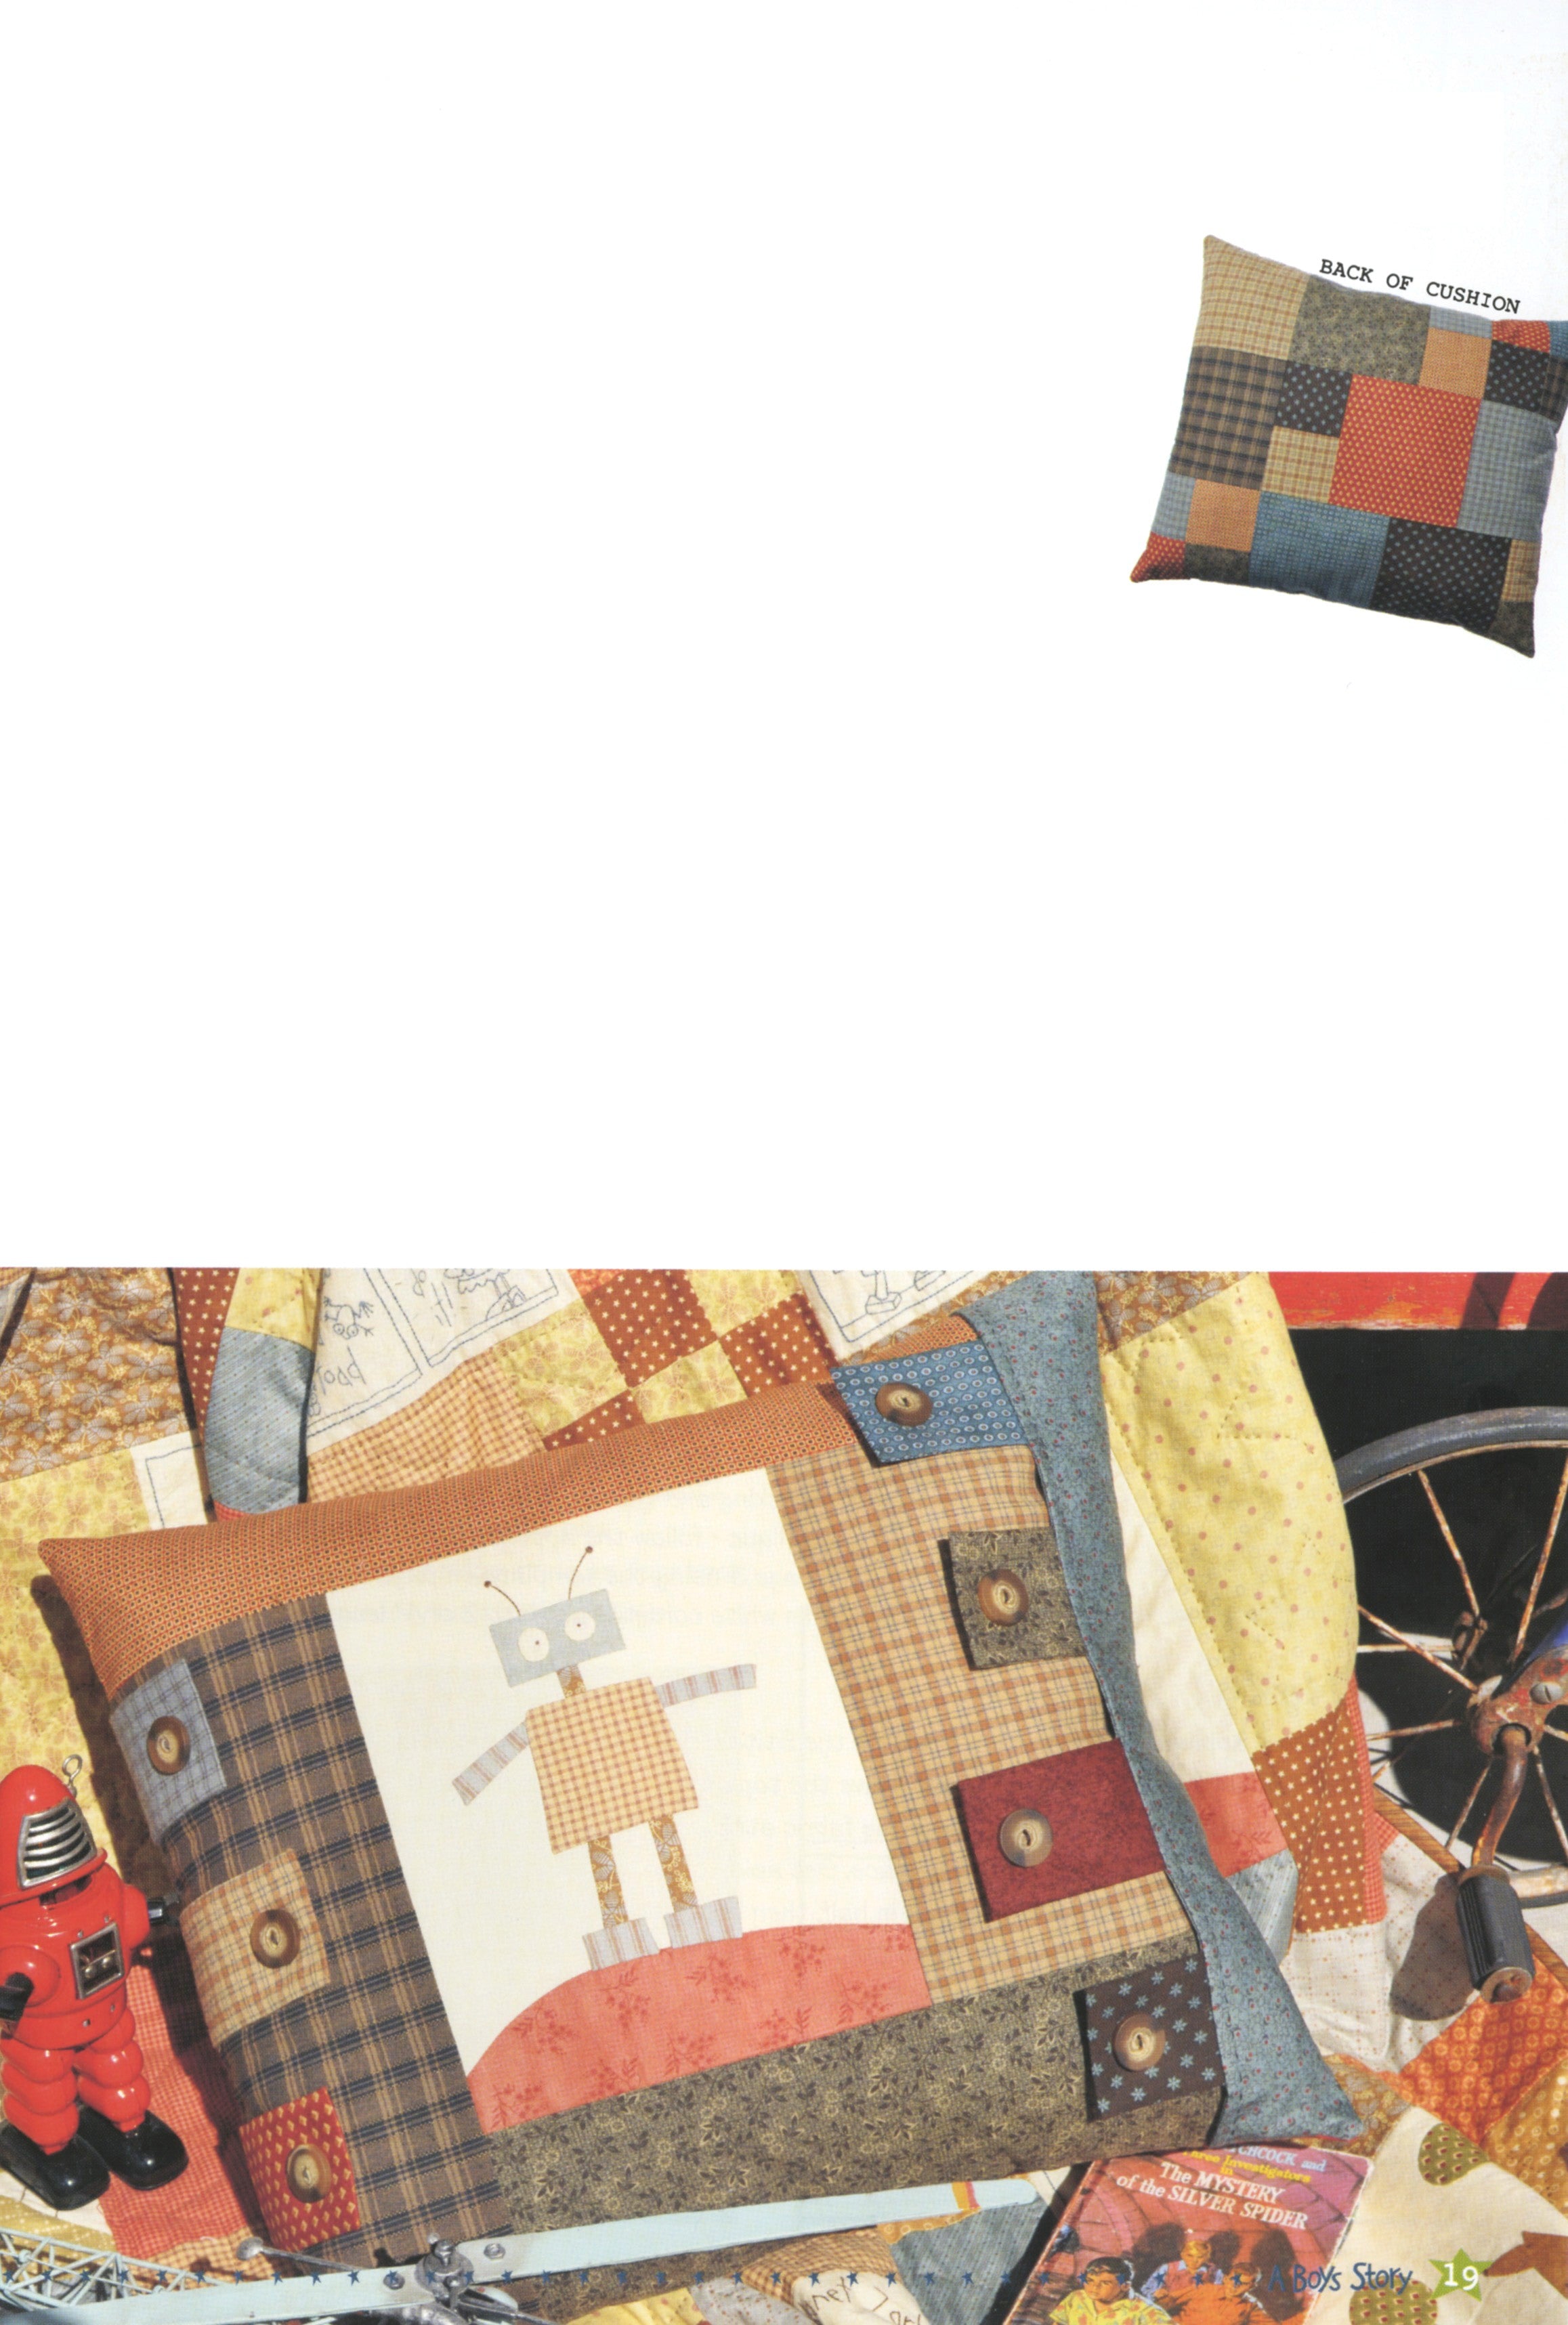 A Boys Story Quilt Pattern Book by Anni Downs of Hatched and Patched